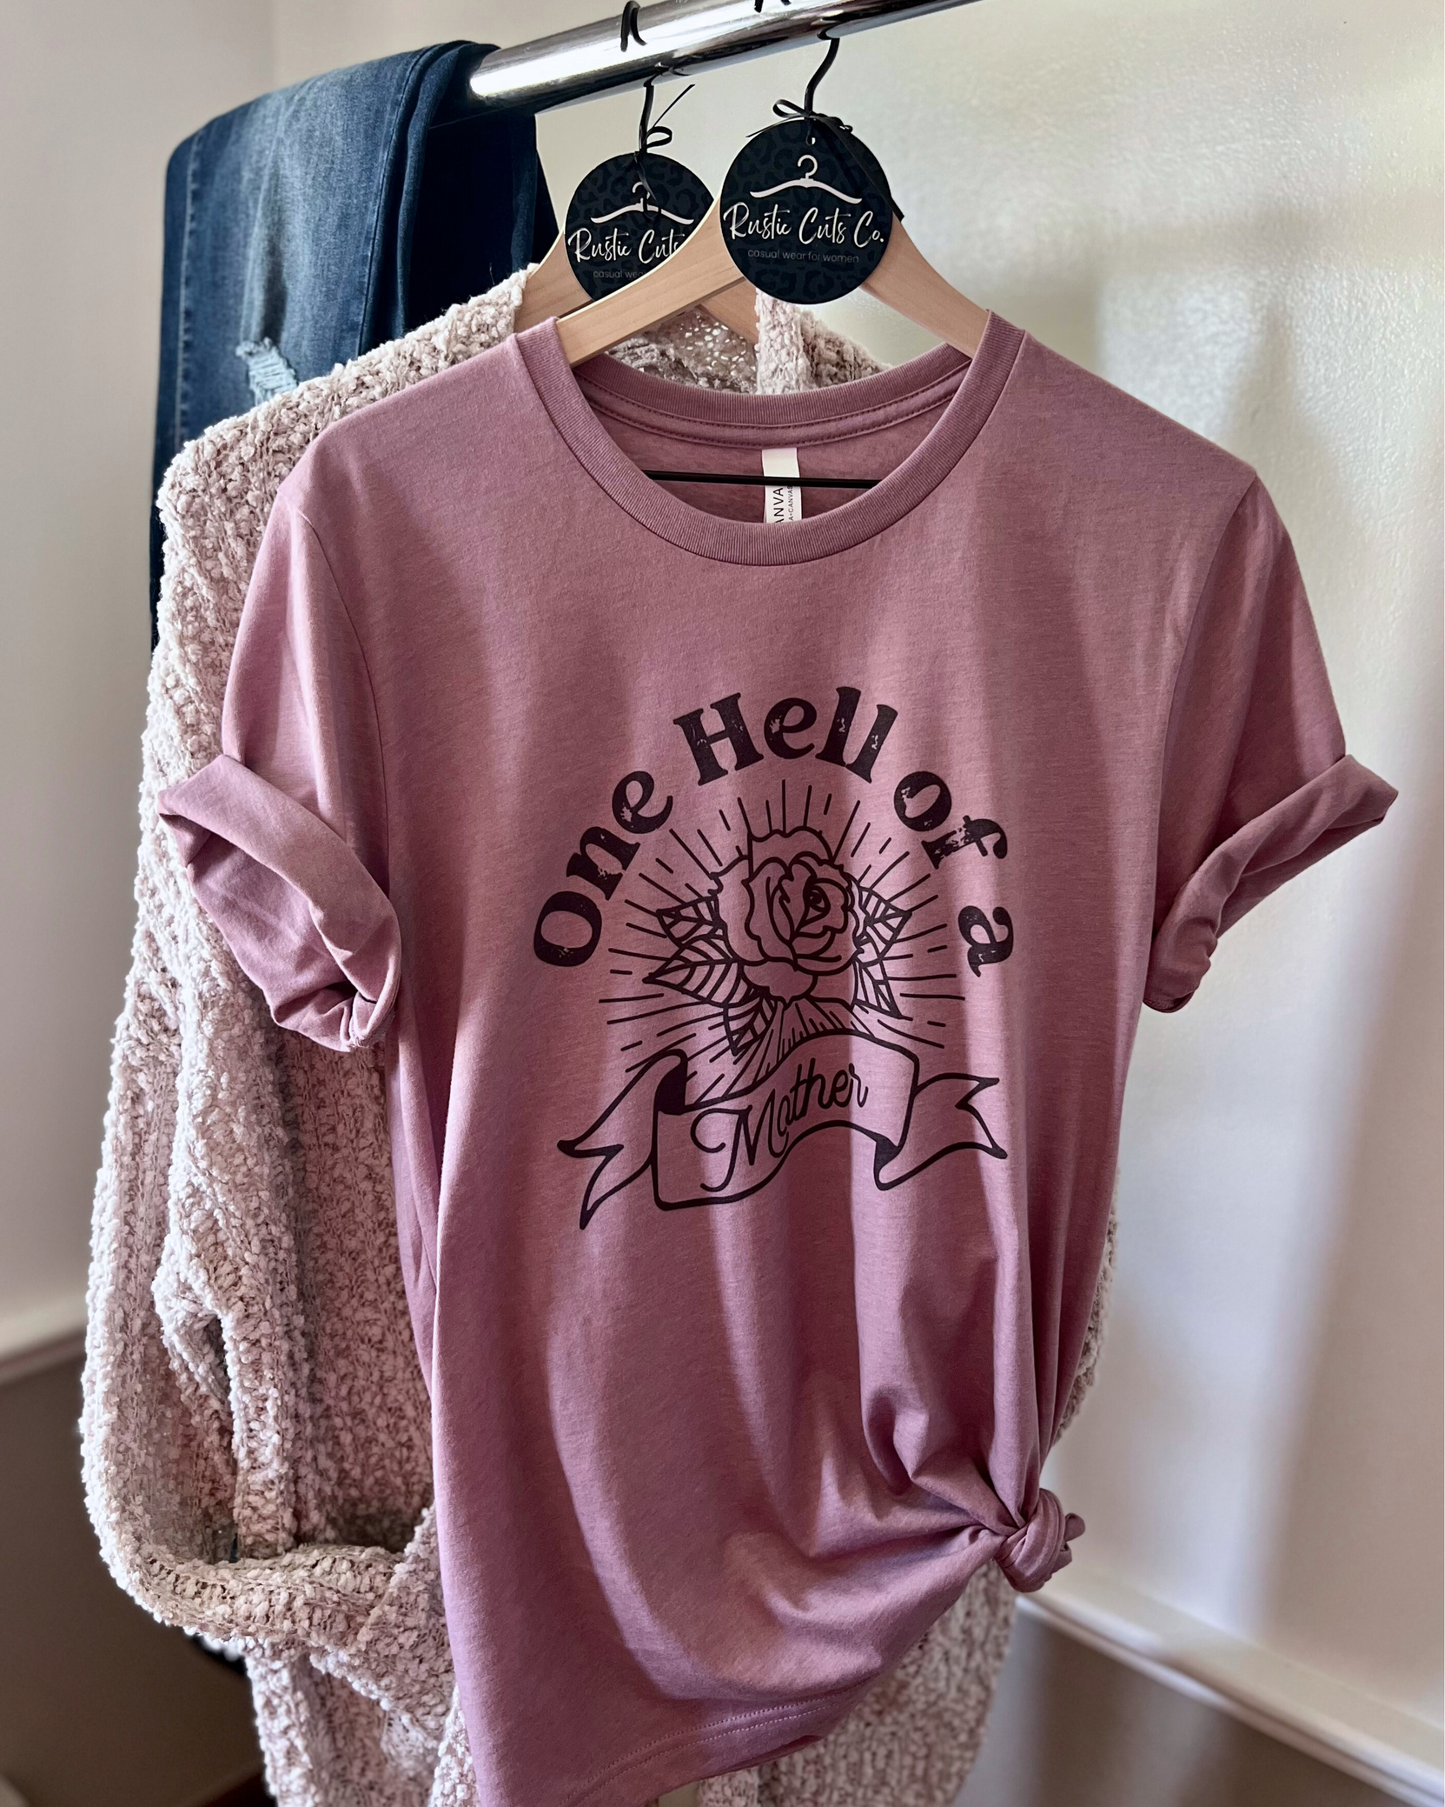 one hell of a mother | t-shirt